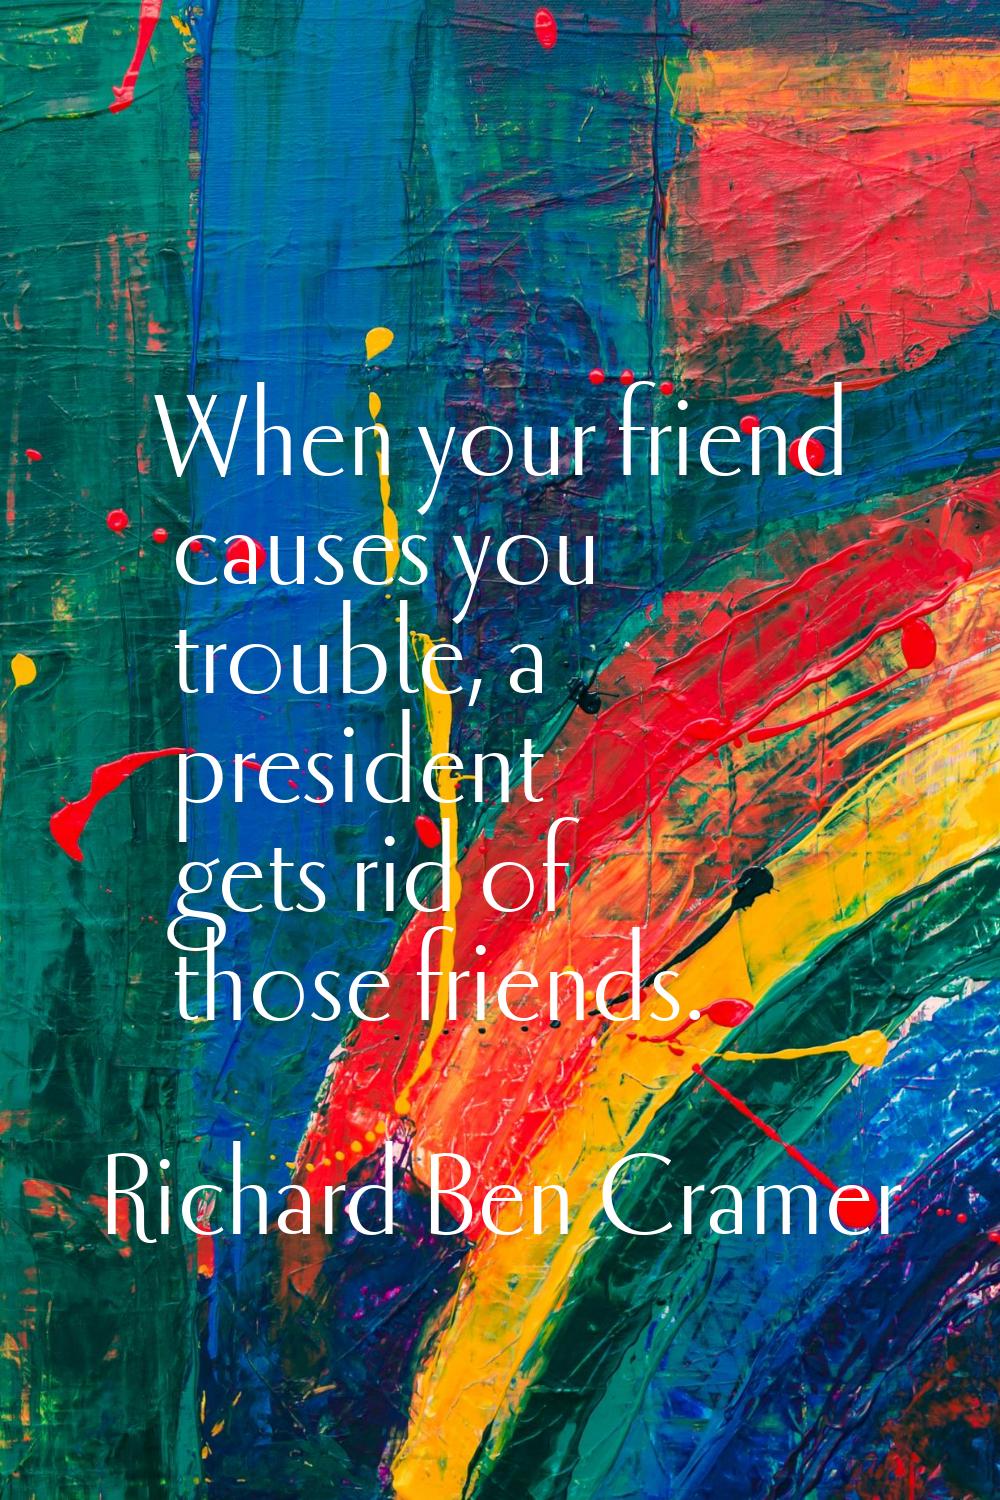 When your friend causes you trouble, a president gets rid of those friends.